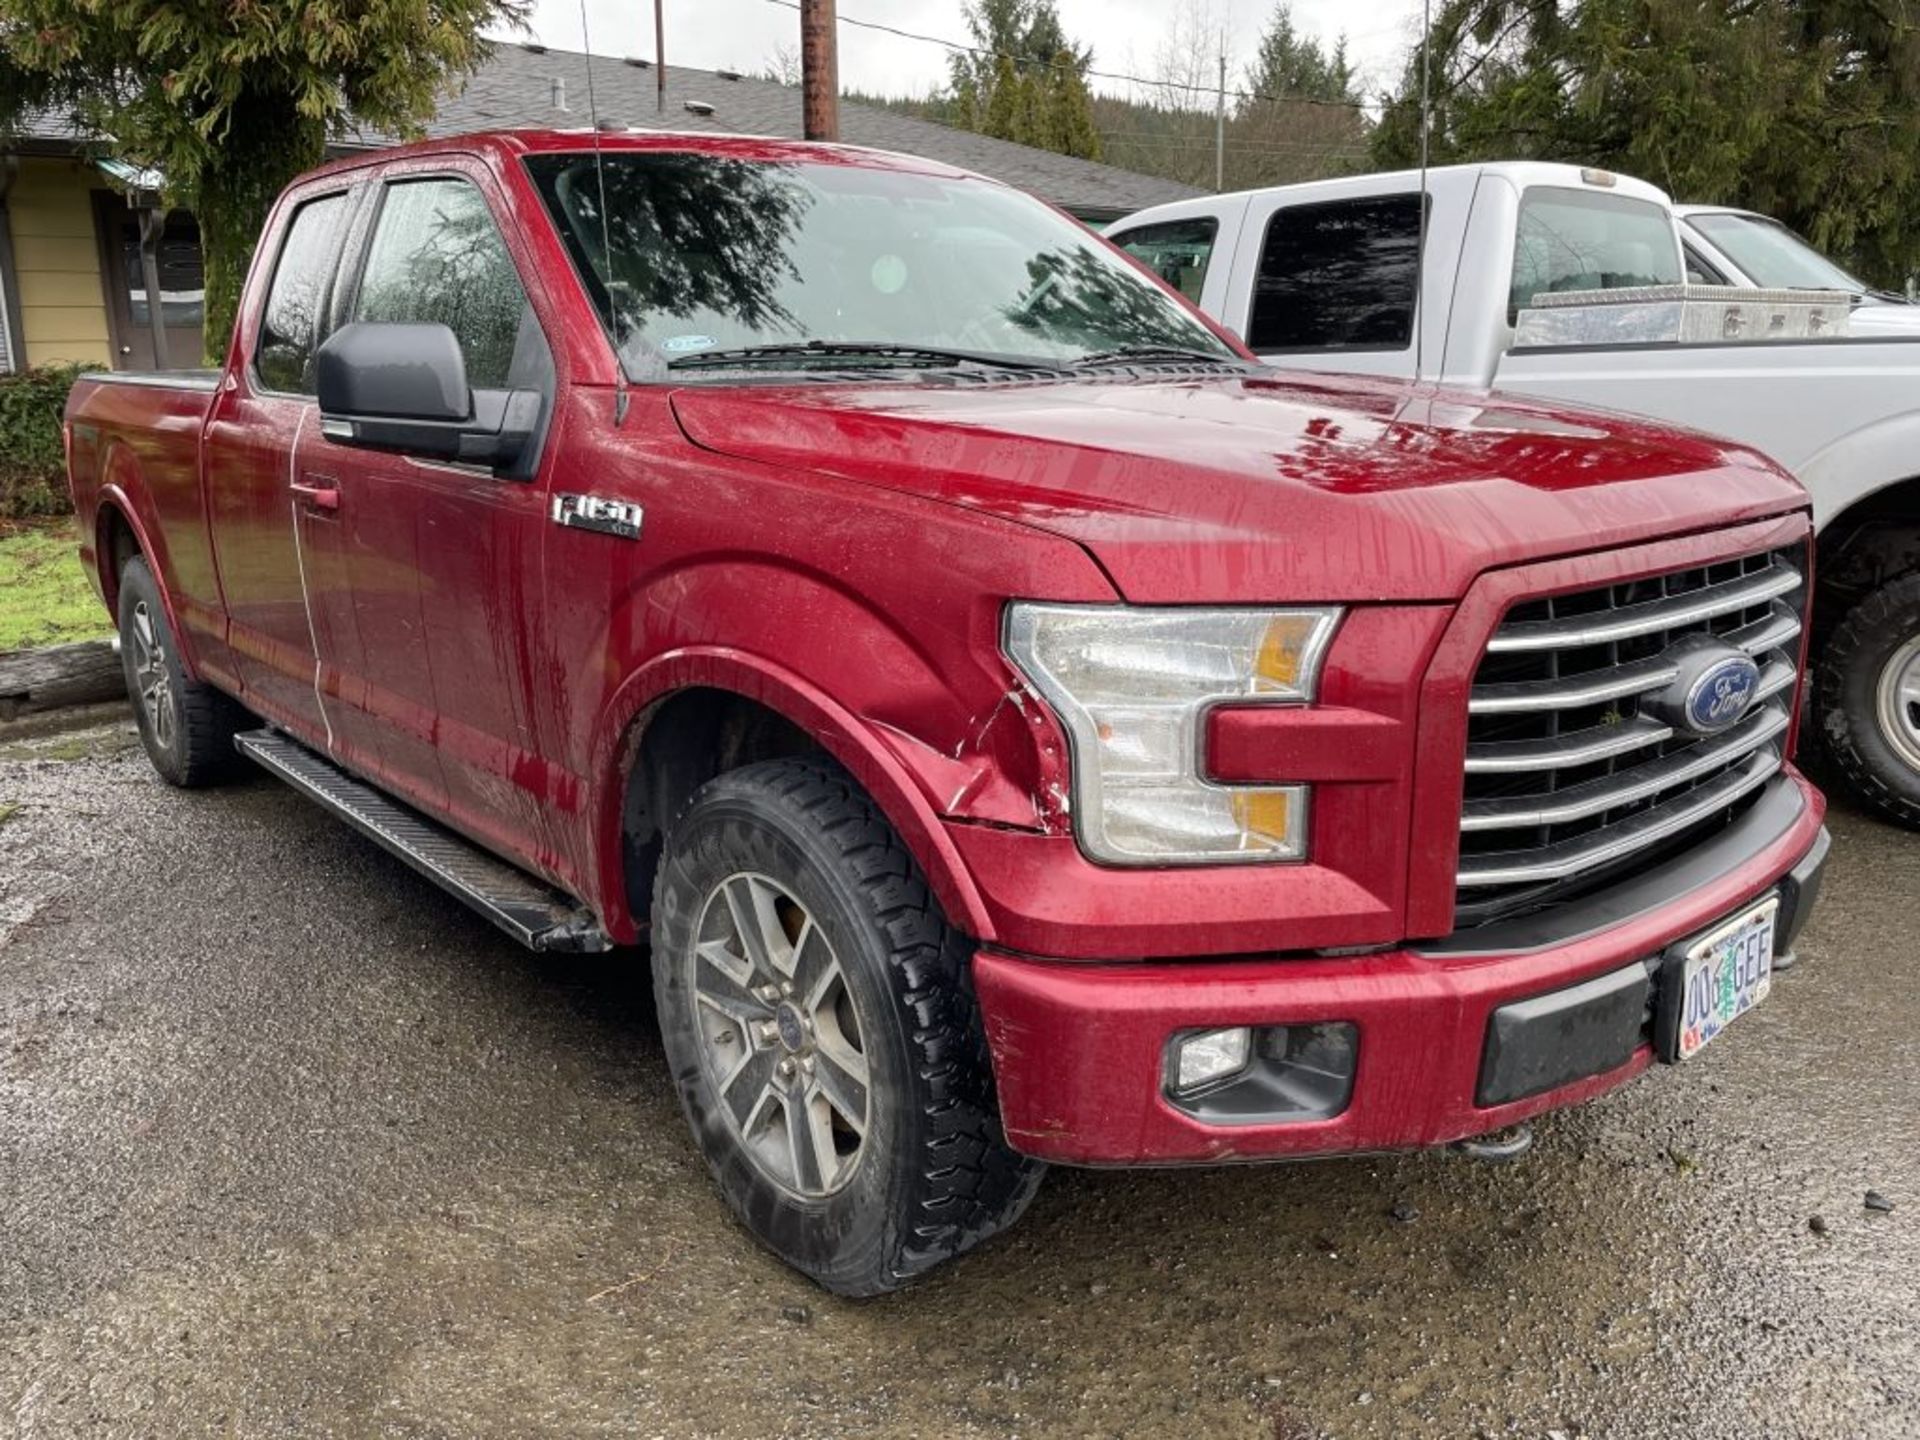 2016 Ford F150 XLT 4x4 Extra Cab Pickup - Image 2 of 14